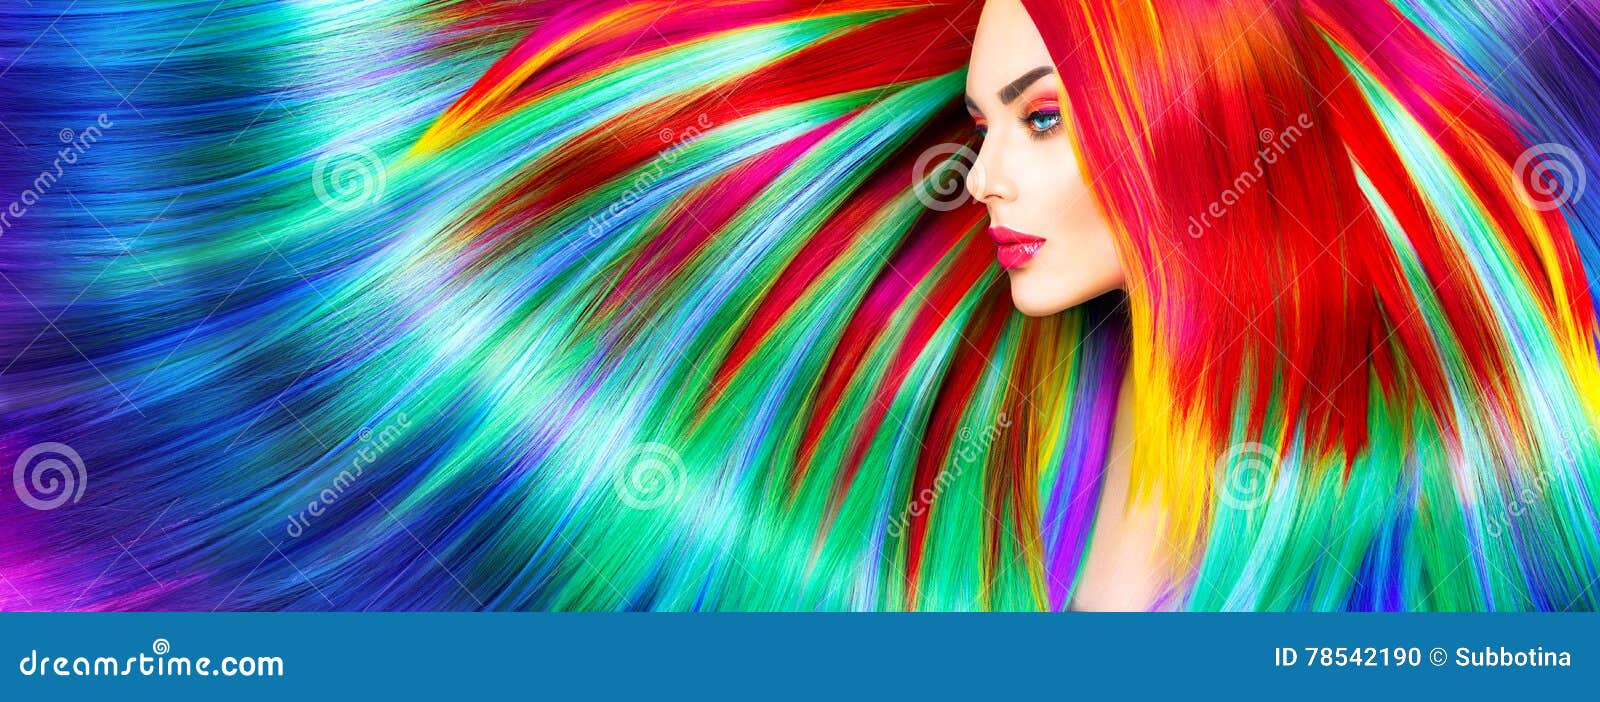 beauty model girl with colorful dyed hair